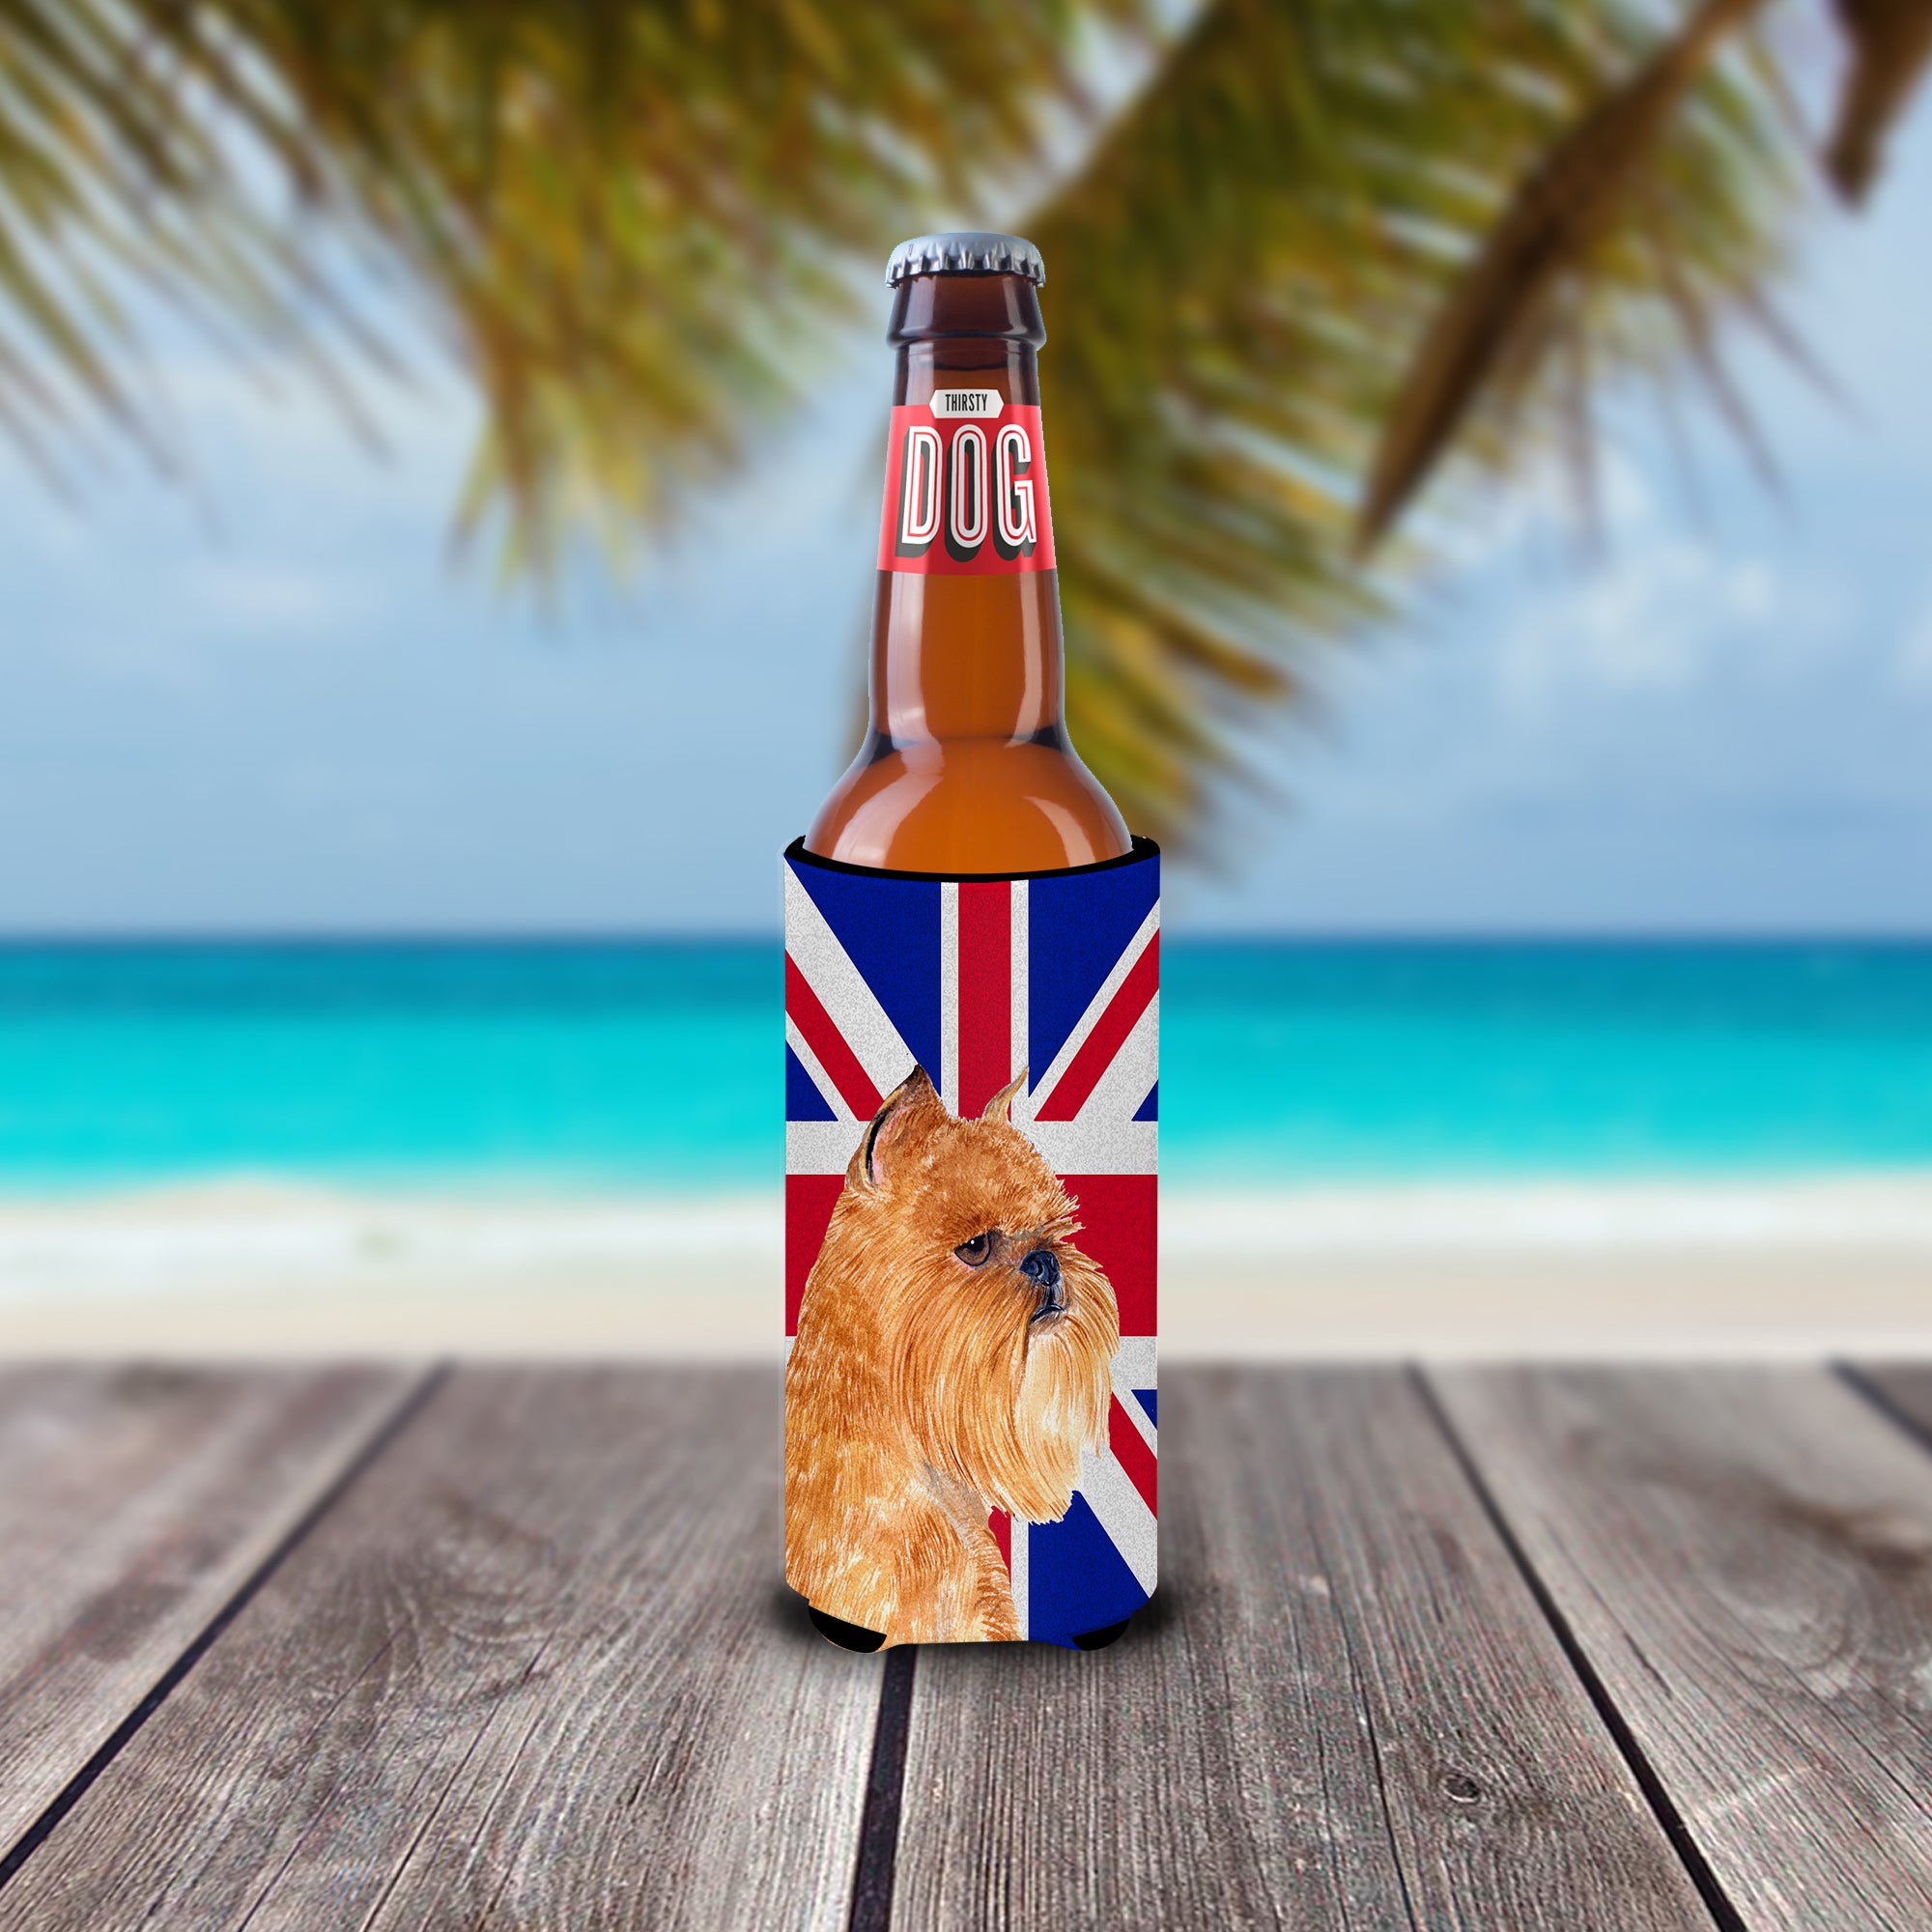 Brussels Griffon with English Union Jack British Flag Ultra Beverage Insulators for slim cans SS4936MUK